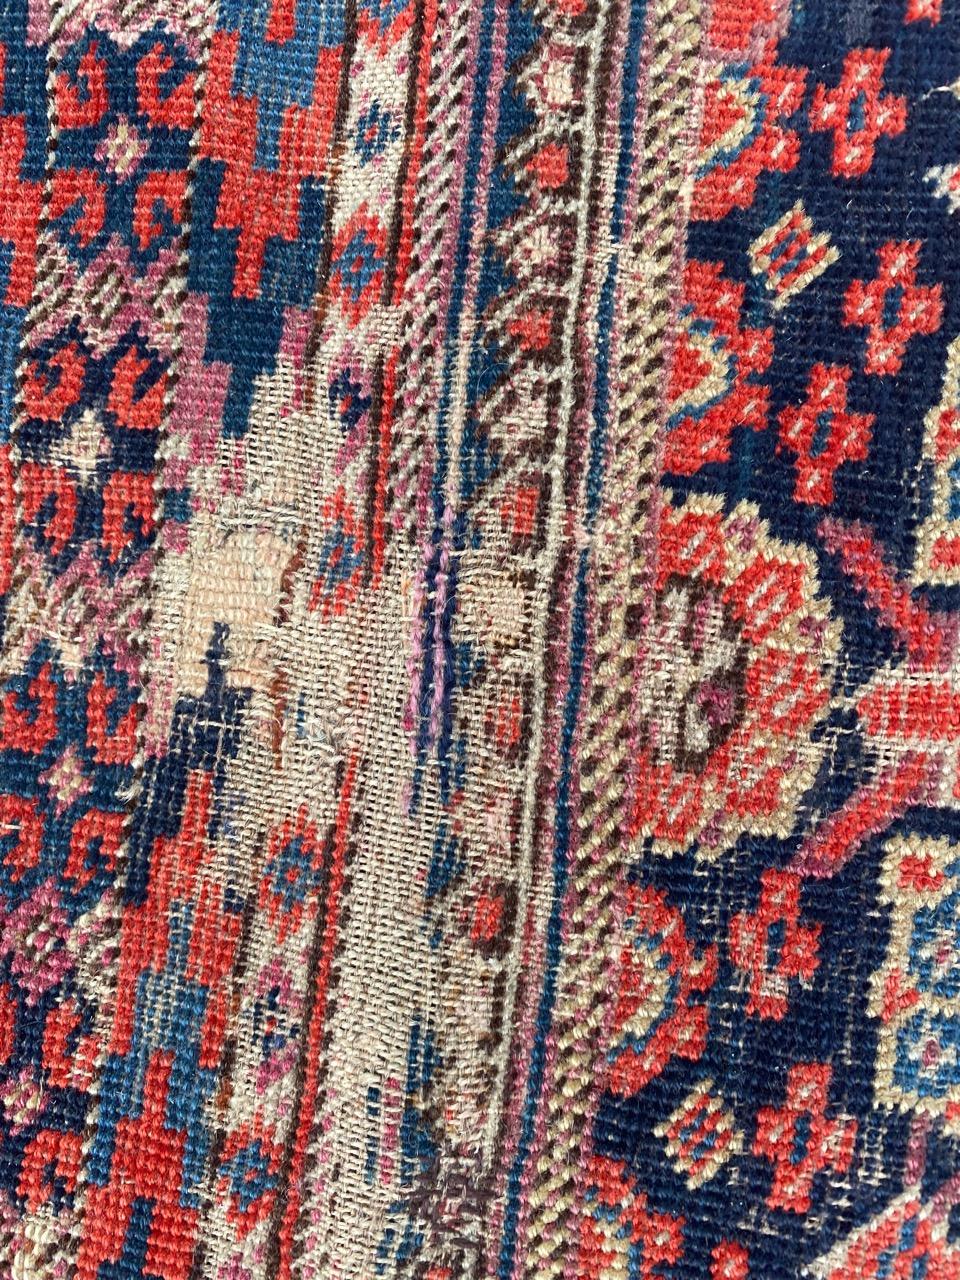 Wonderful extremely fine early 20th century Turkmen rug with beautiful unusual Herati design and beautiful natural colors entirely hand knotted with wool velvet on wool foundation.

✨✨✨
